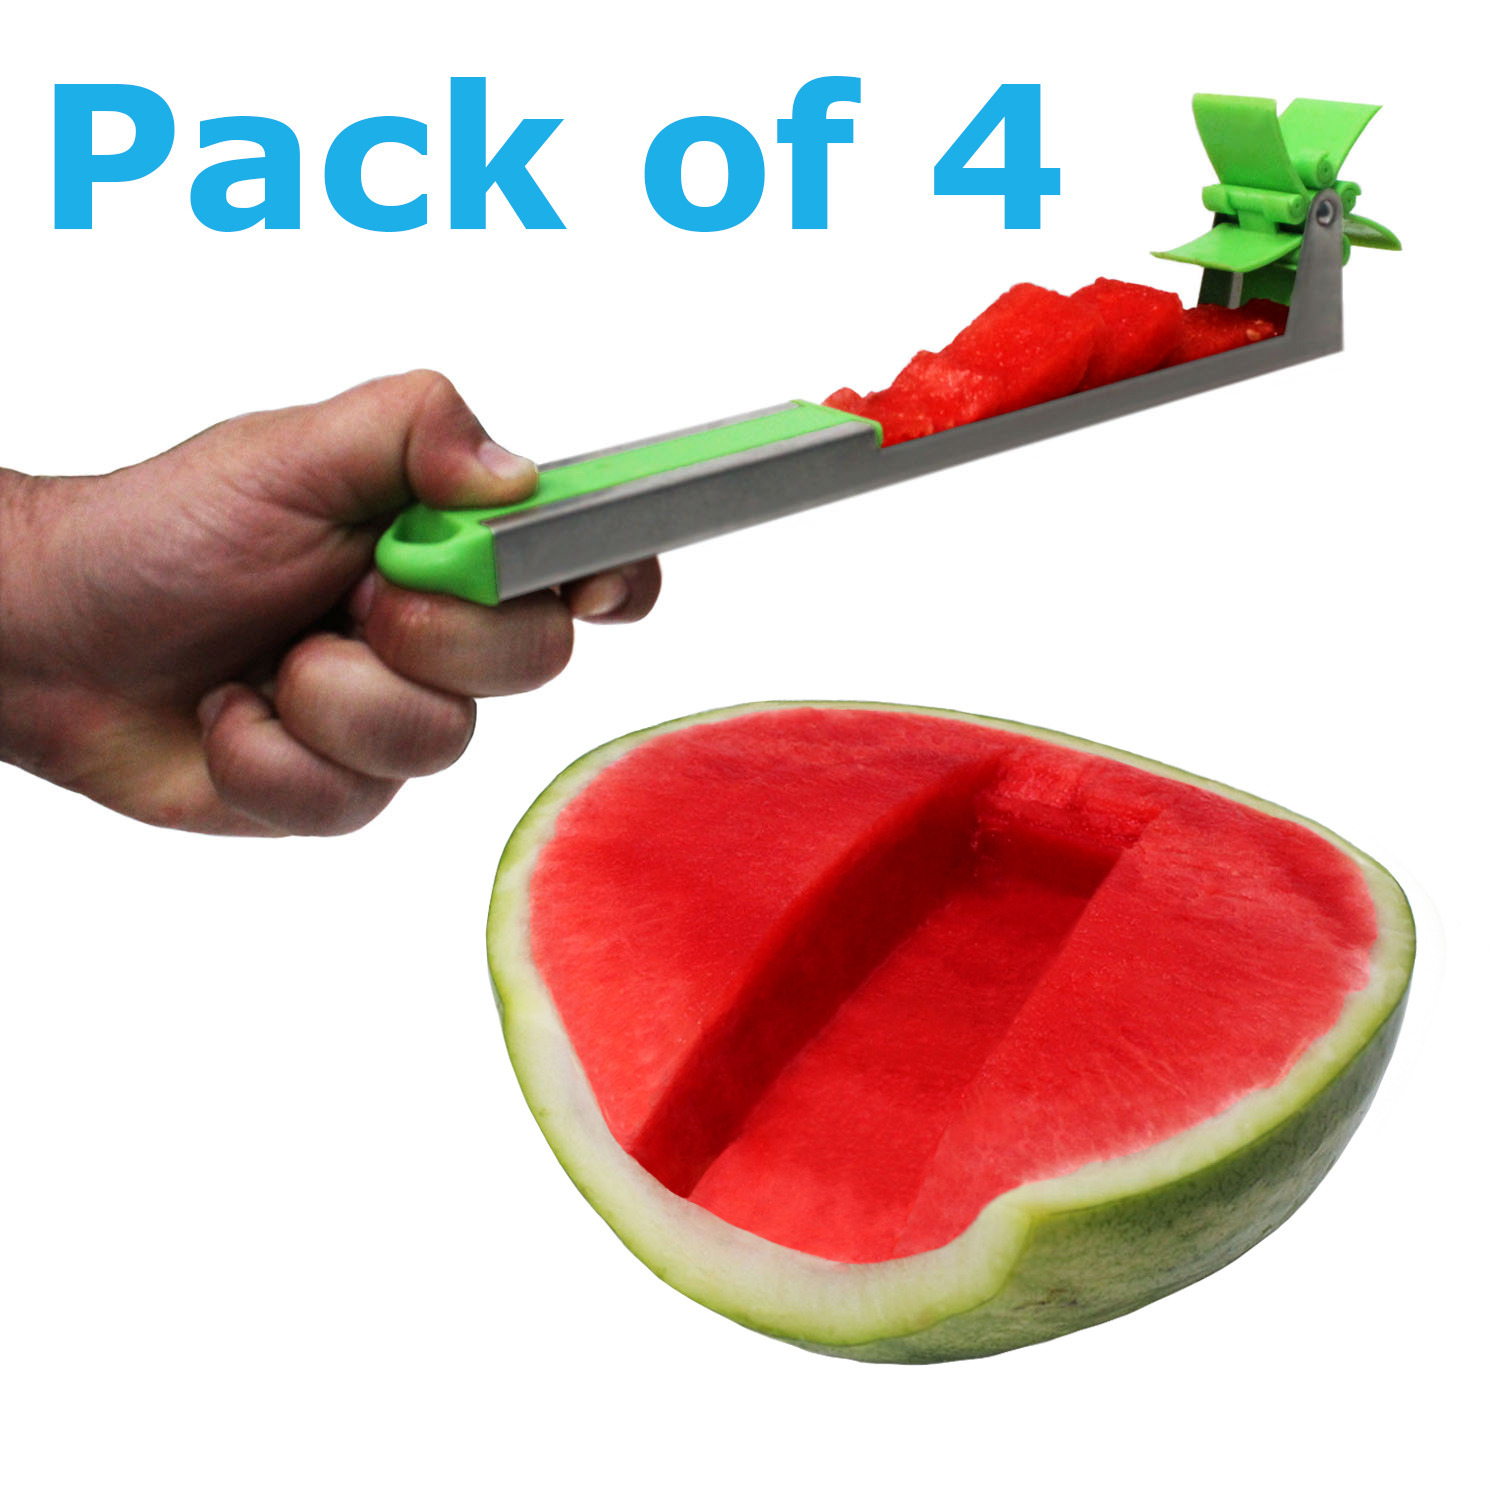 Blue Donuts Watermelon slicer pack of 4 